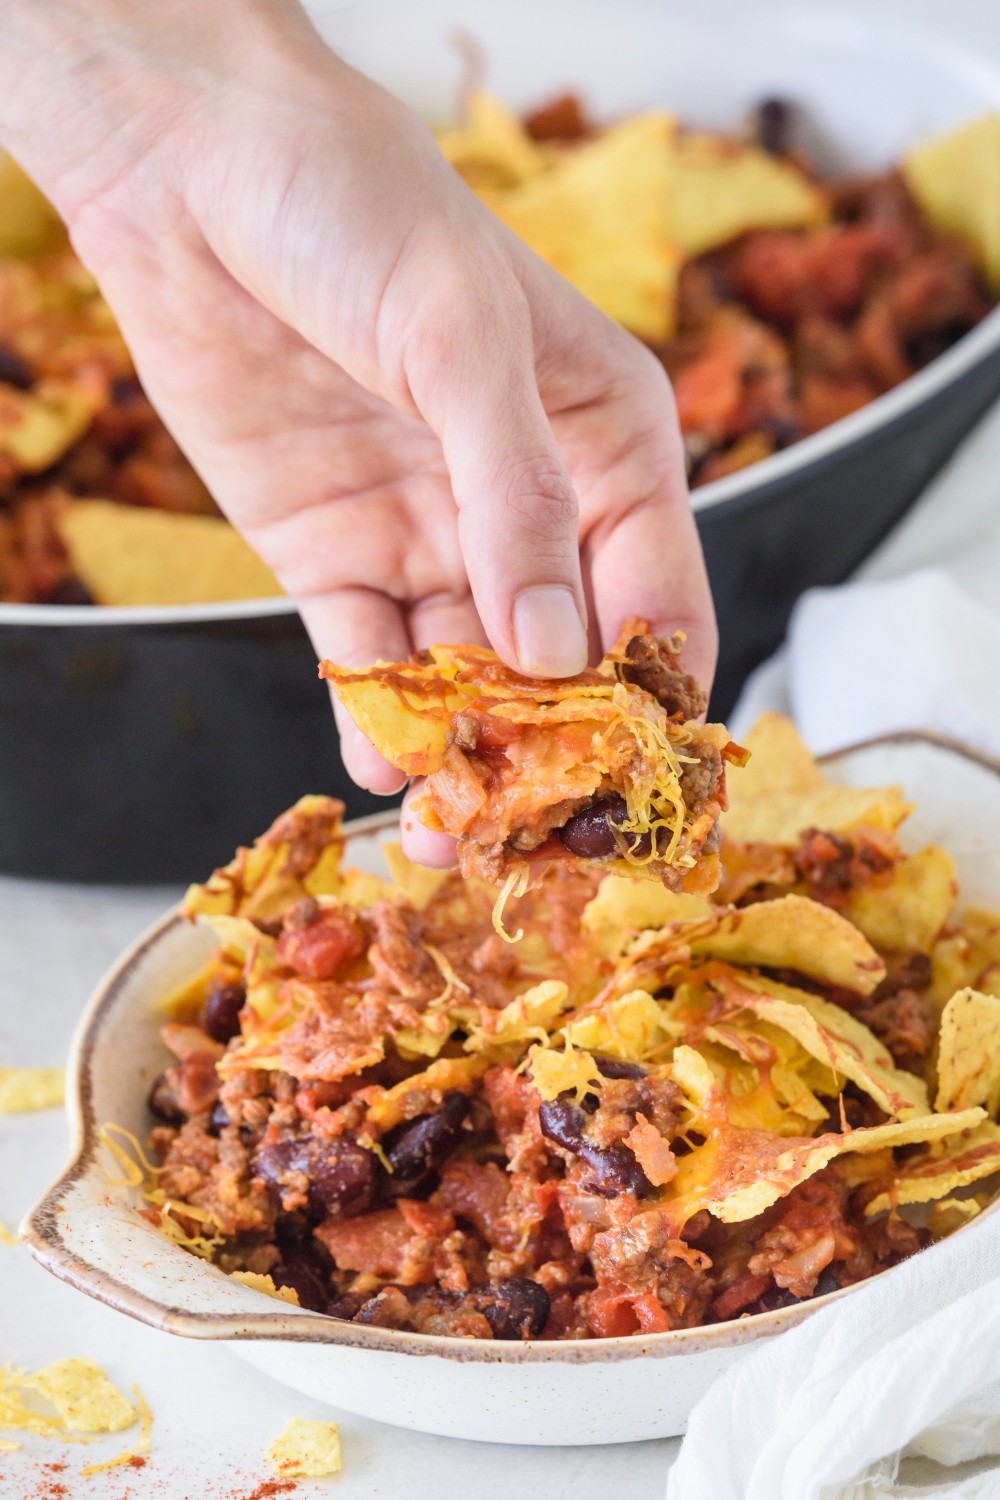 A bowl with taco casserole a hand is holding a chip piled with taco casserole on it.